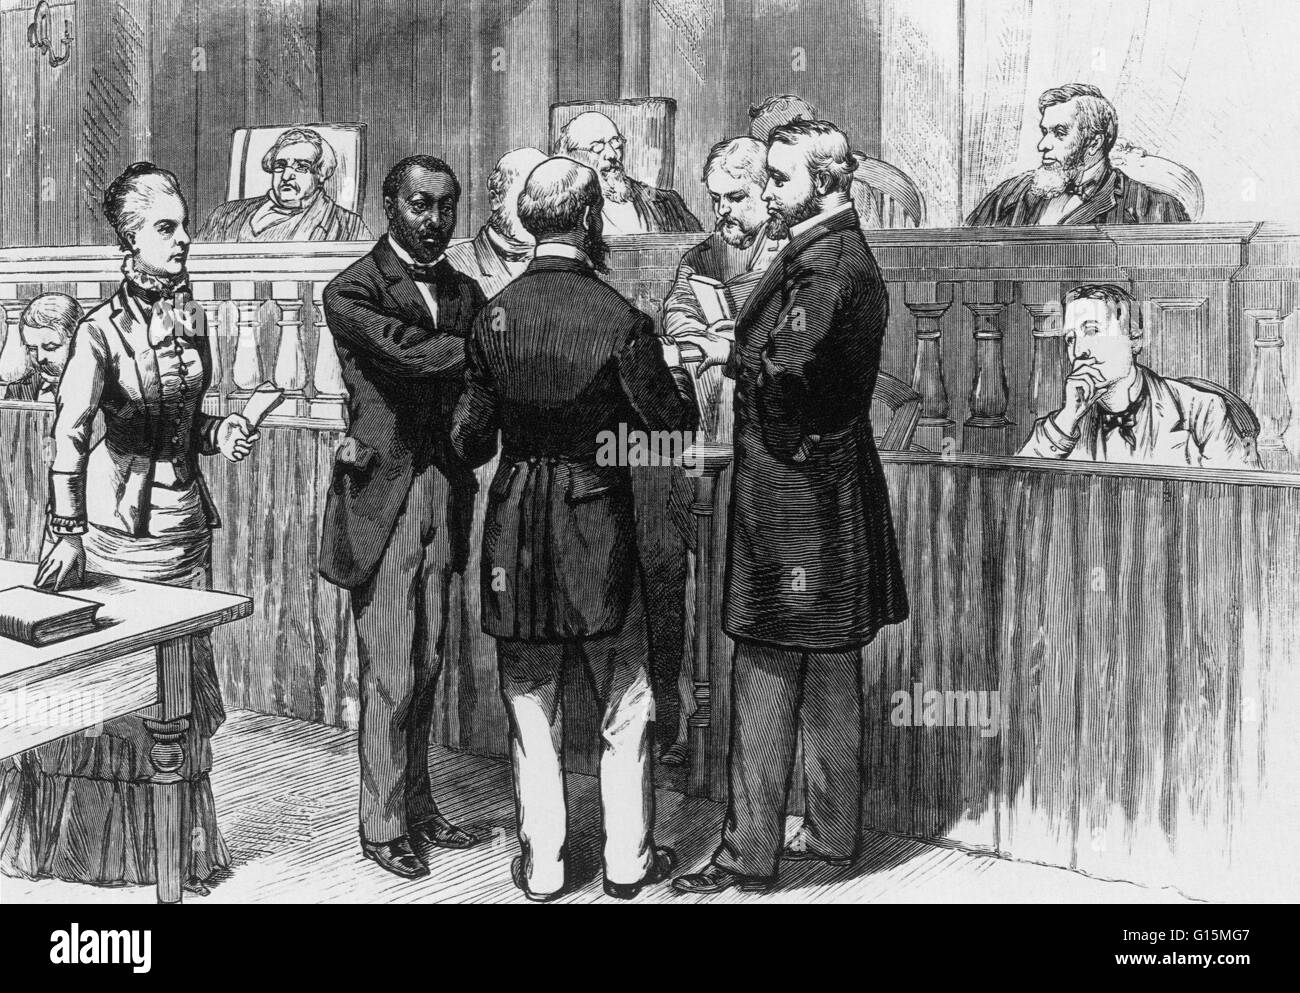 Illustration captioned: 'On February 2, 1880, Hiram Revels became the first African-American admitted before the Supreme Court.' Hiram Rhodes Revels (September 27, 1827 - January 16, 1901) was the first non-white to serve in the United States Senate. He w Stock Photo